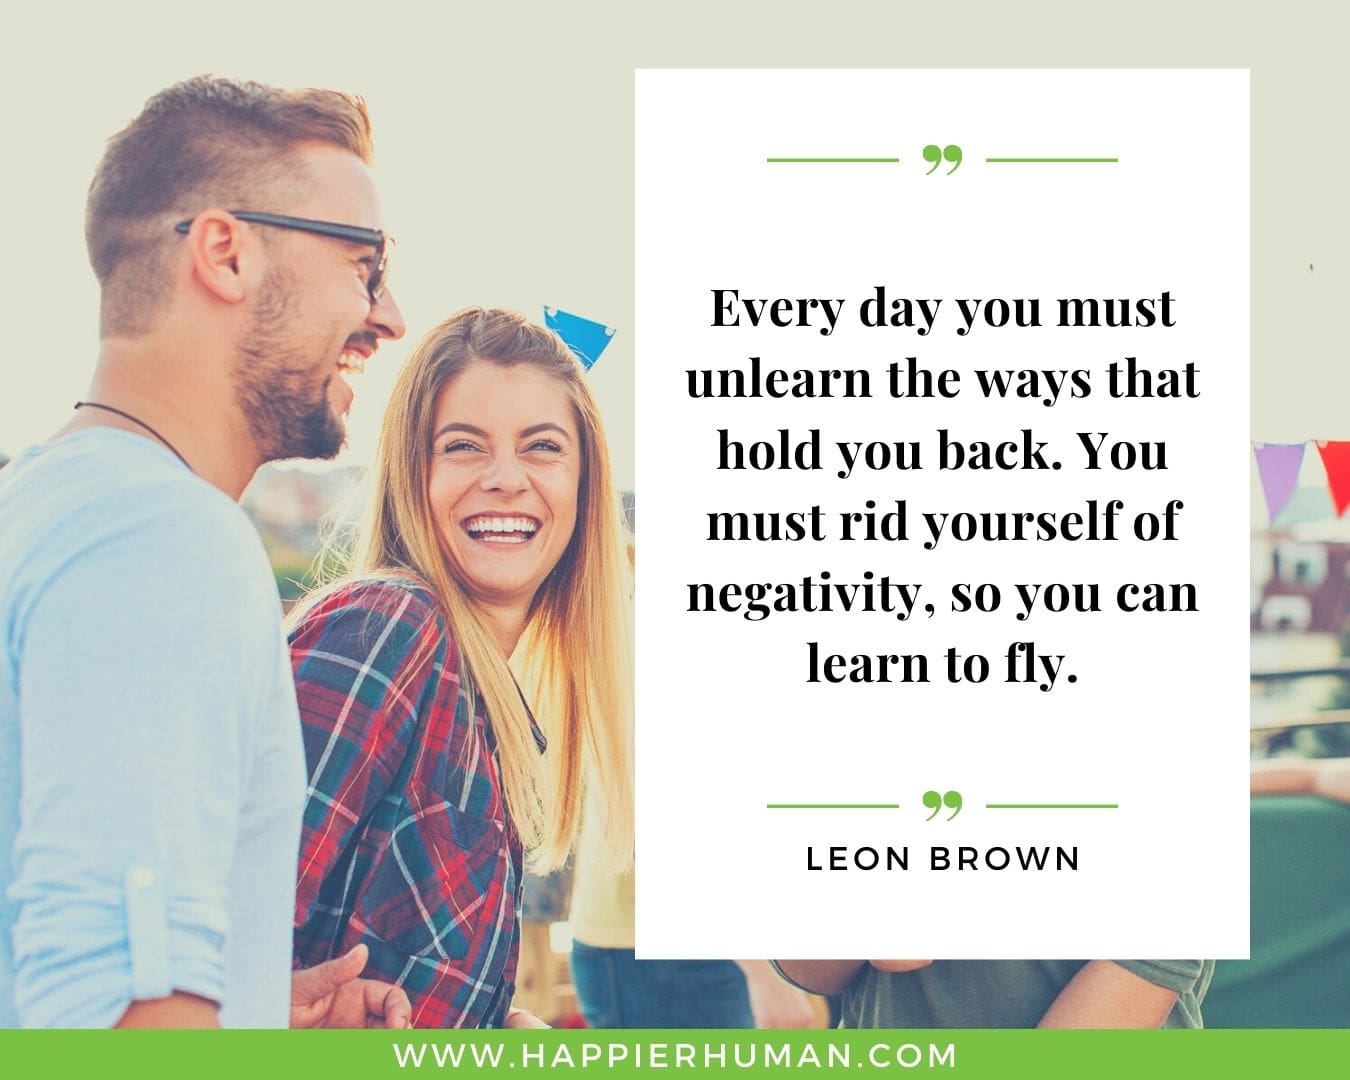 Toxic People Quotes - “Every day you must unlearn the ways that hold you back. You must rid yourself of negativity, so you can learn to fly.” – Leon Brown